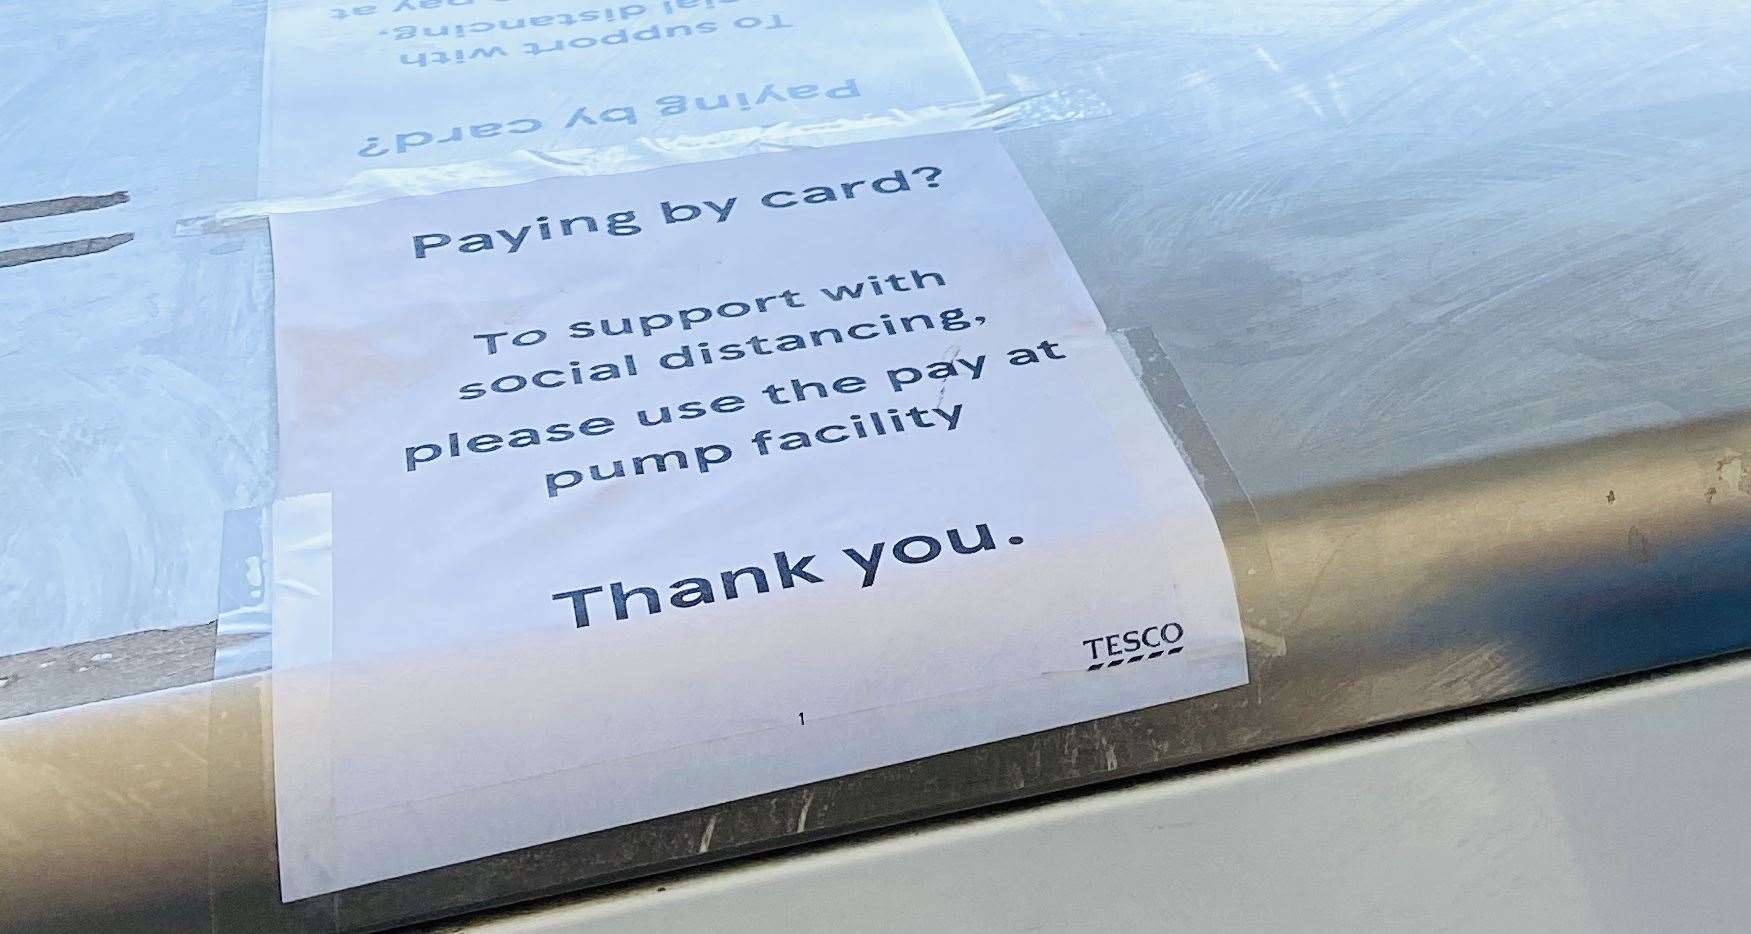 Customers at Tesco are advised to pay at pump